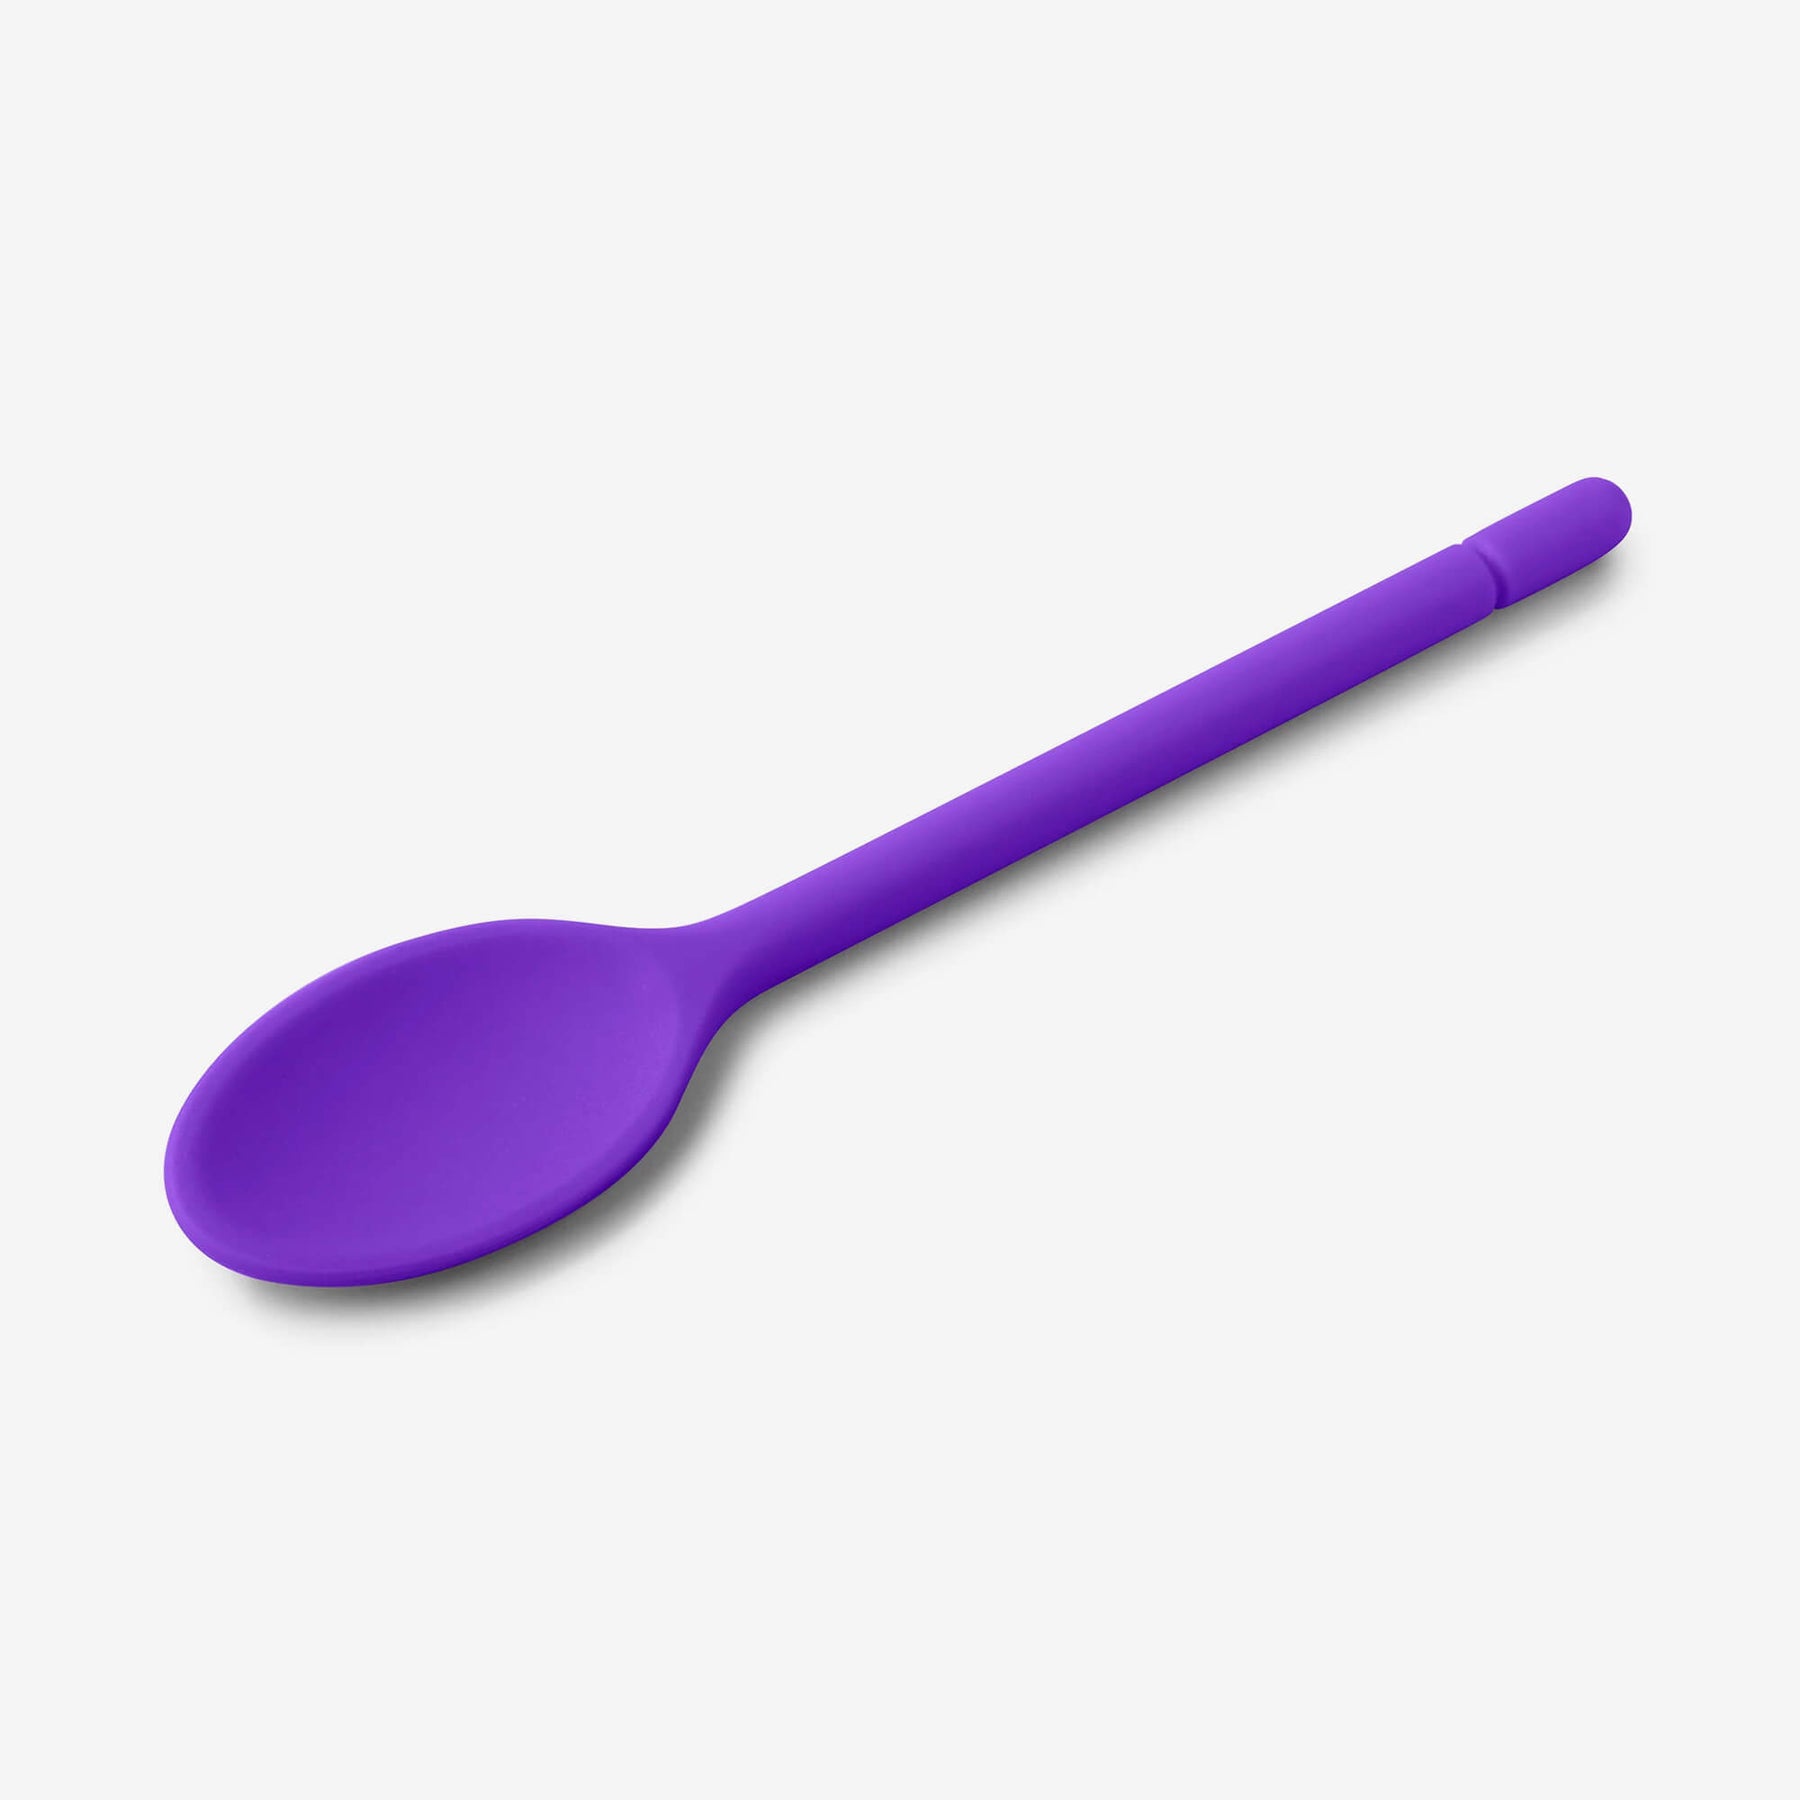 Traditional Silicone Cook’s Spoon, 25cm